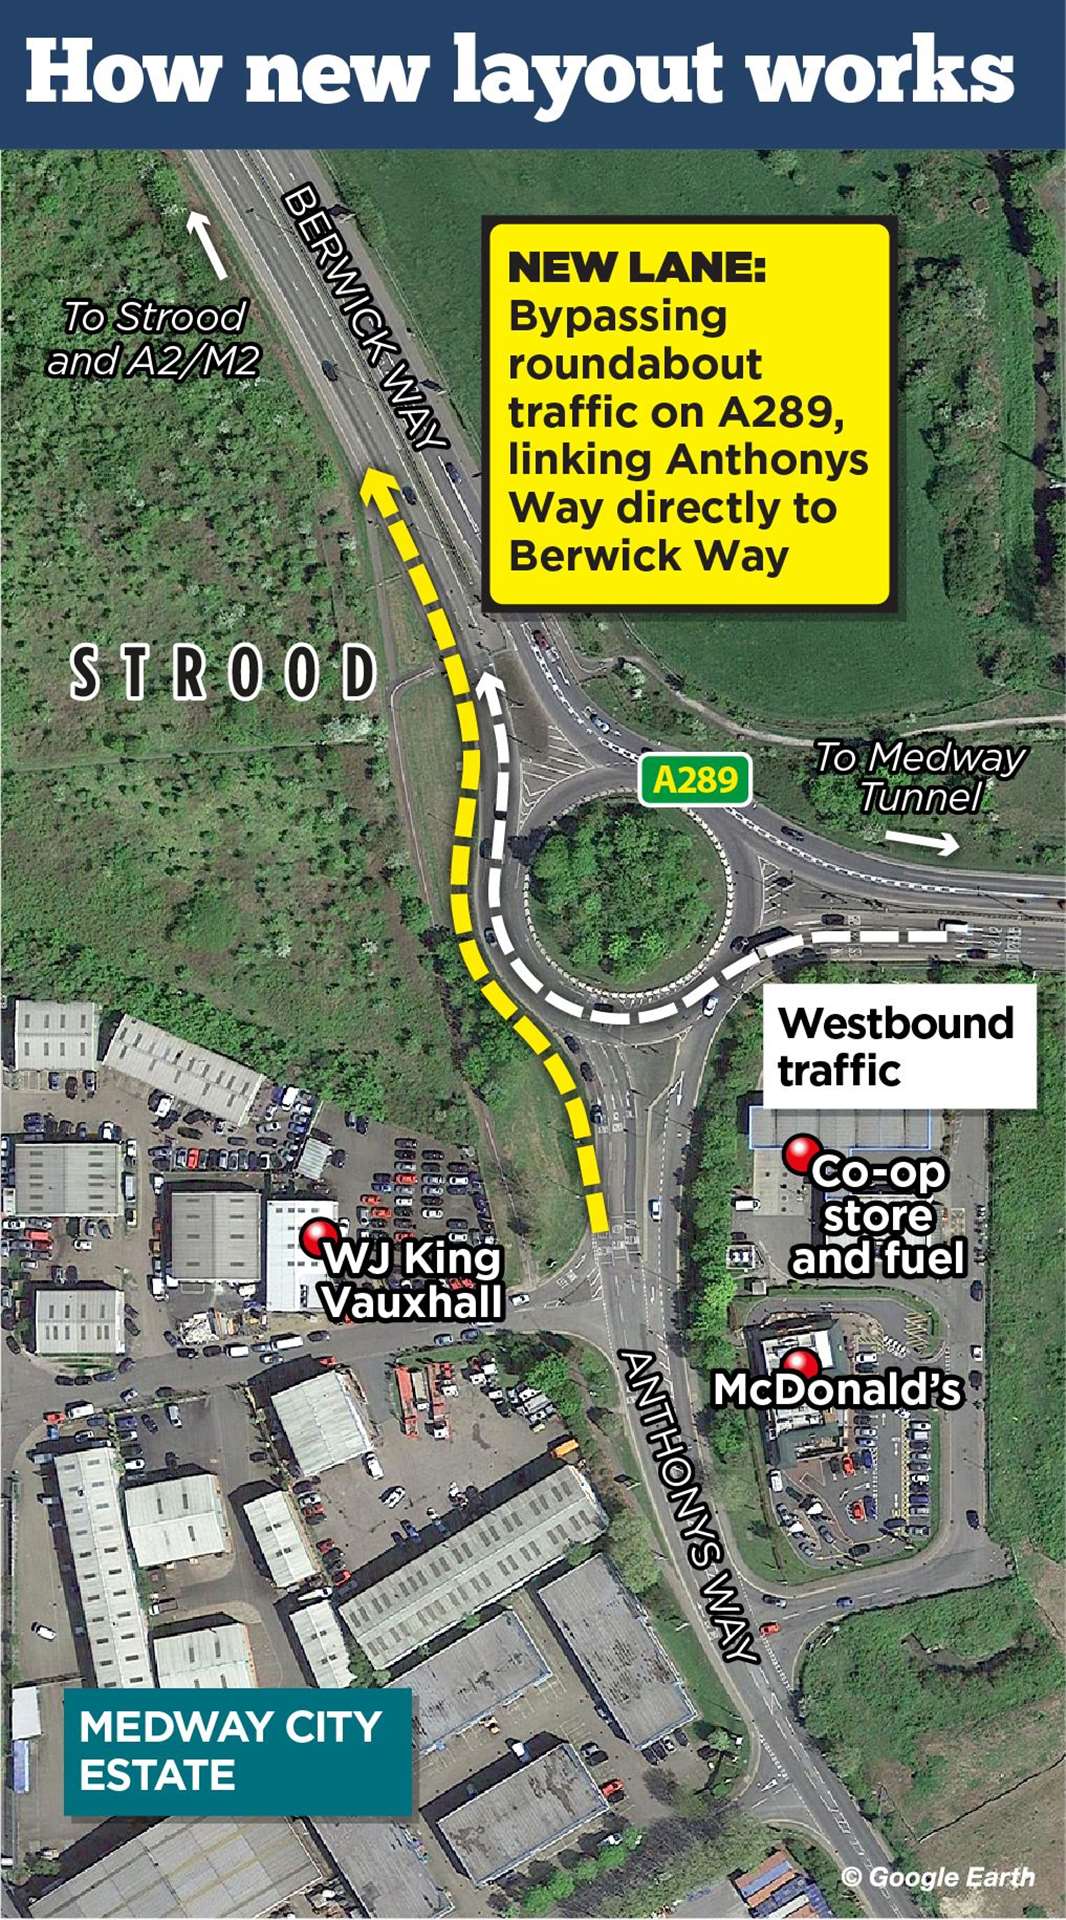 The slip road will take traffic away from the Medway City Estate